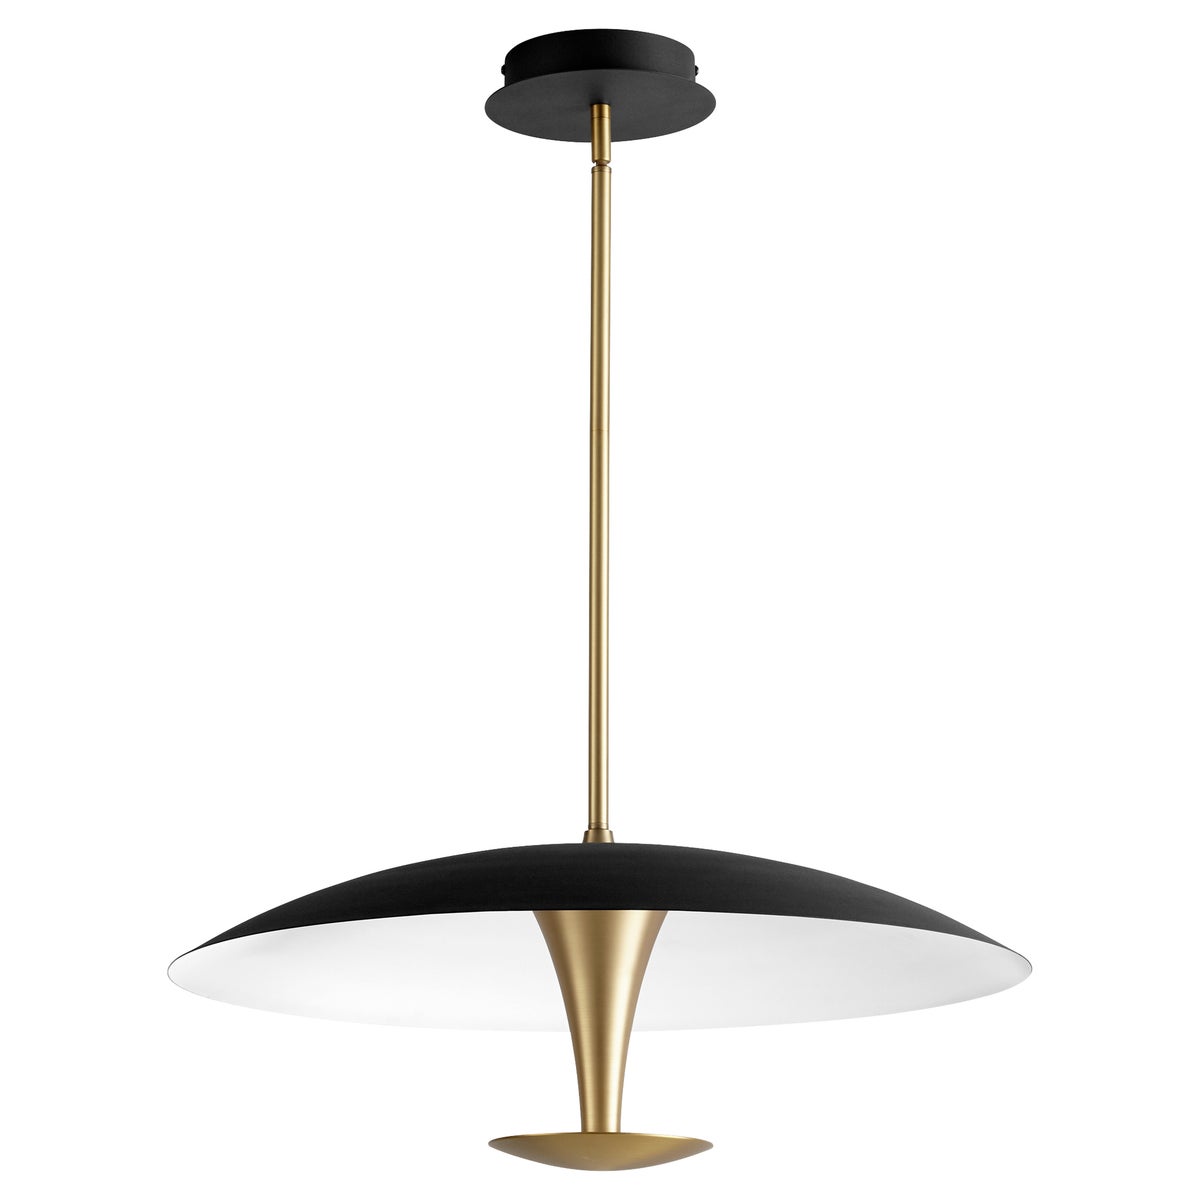 SPACELY 26" Pendant | Black & Aged Brass